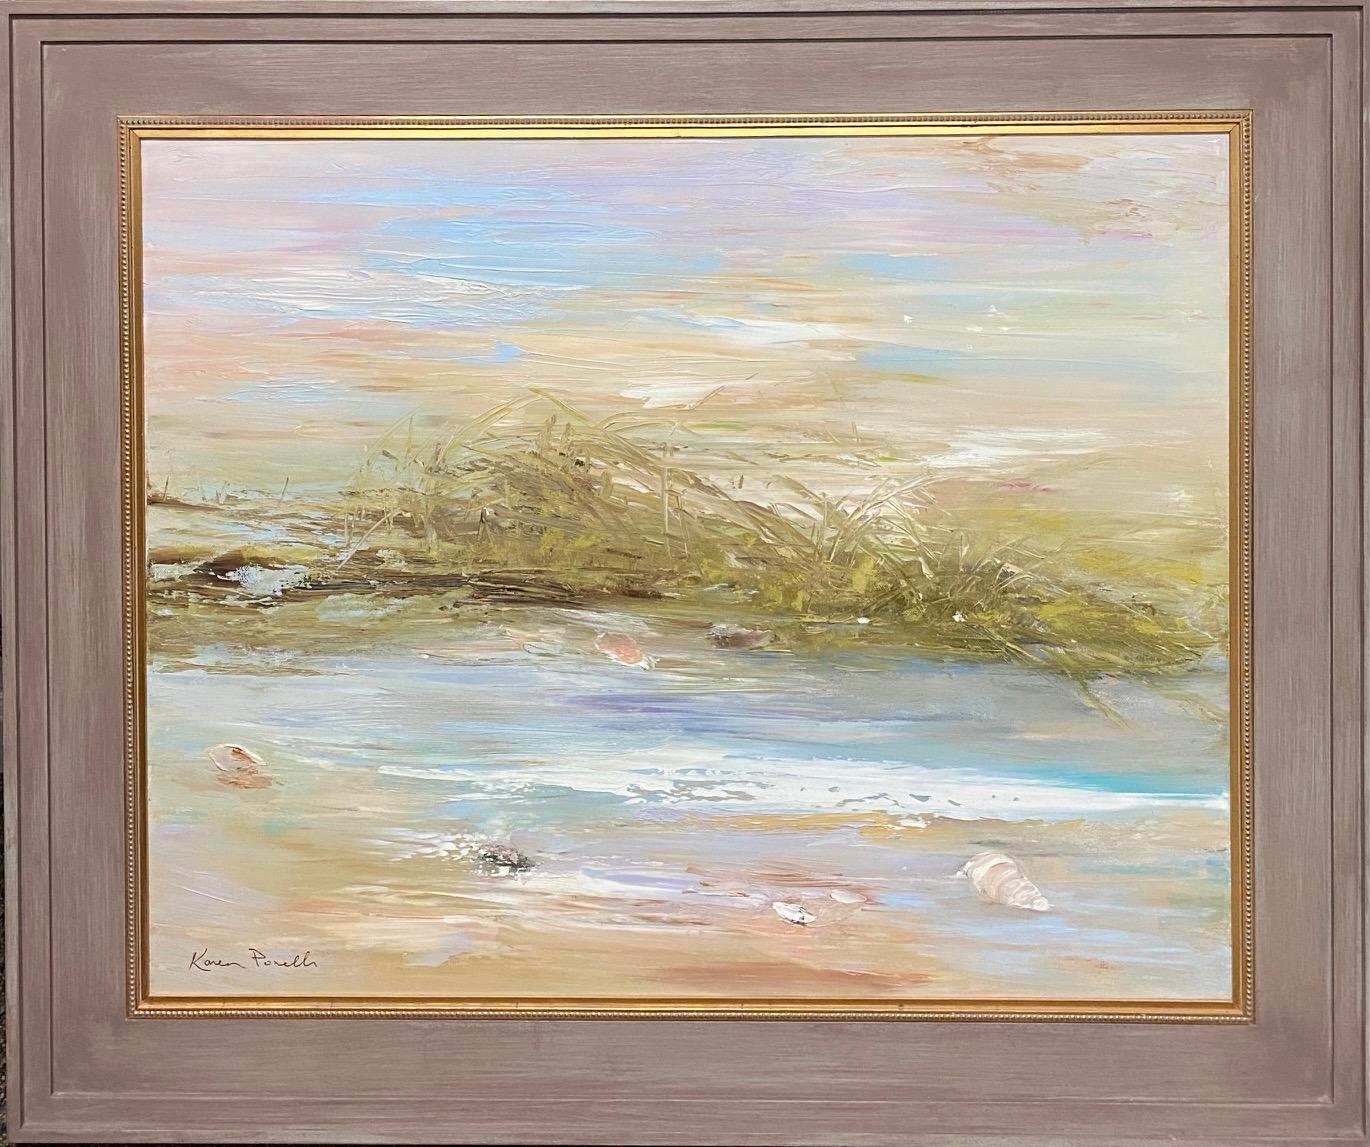 Karen Ponelli Abstract Painting - Sun Washed Seashells, original 24x30 abstract expressionist marine landscape